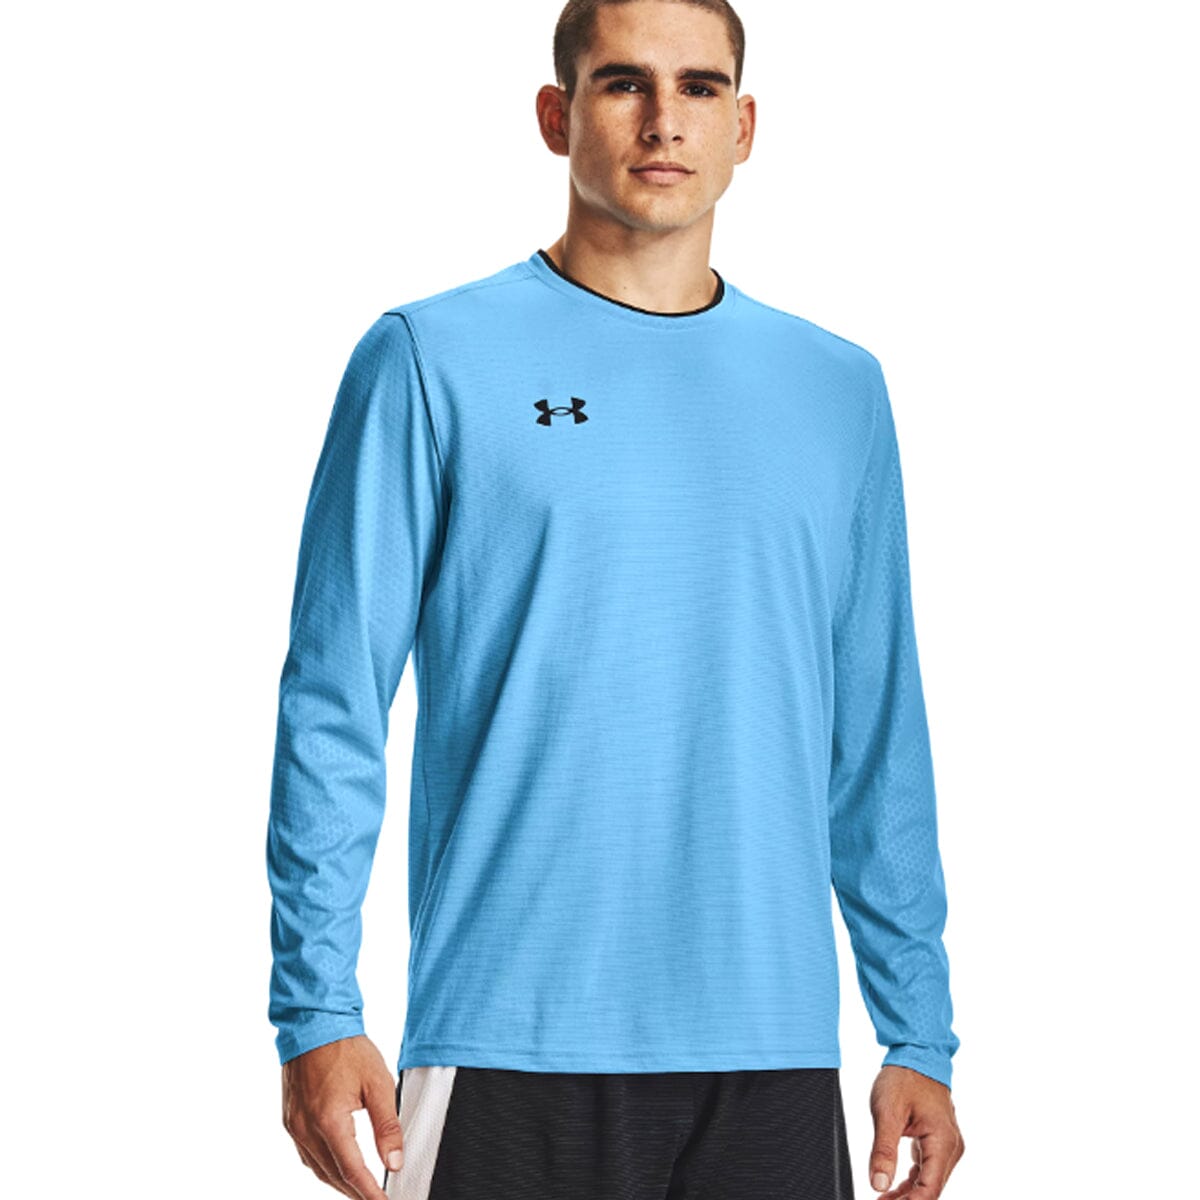 Under Armour Heat Gear Compression Long Sleeve w/ The Ref's Room logo